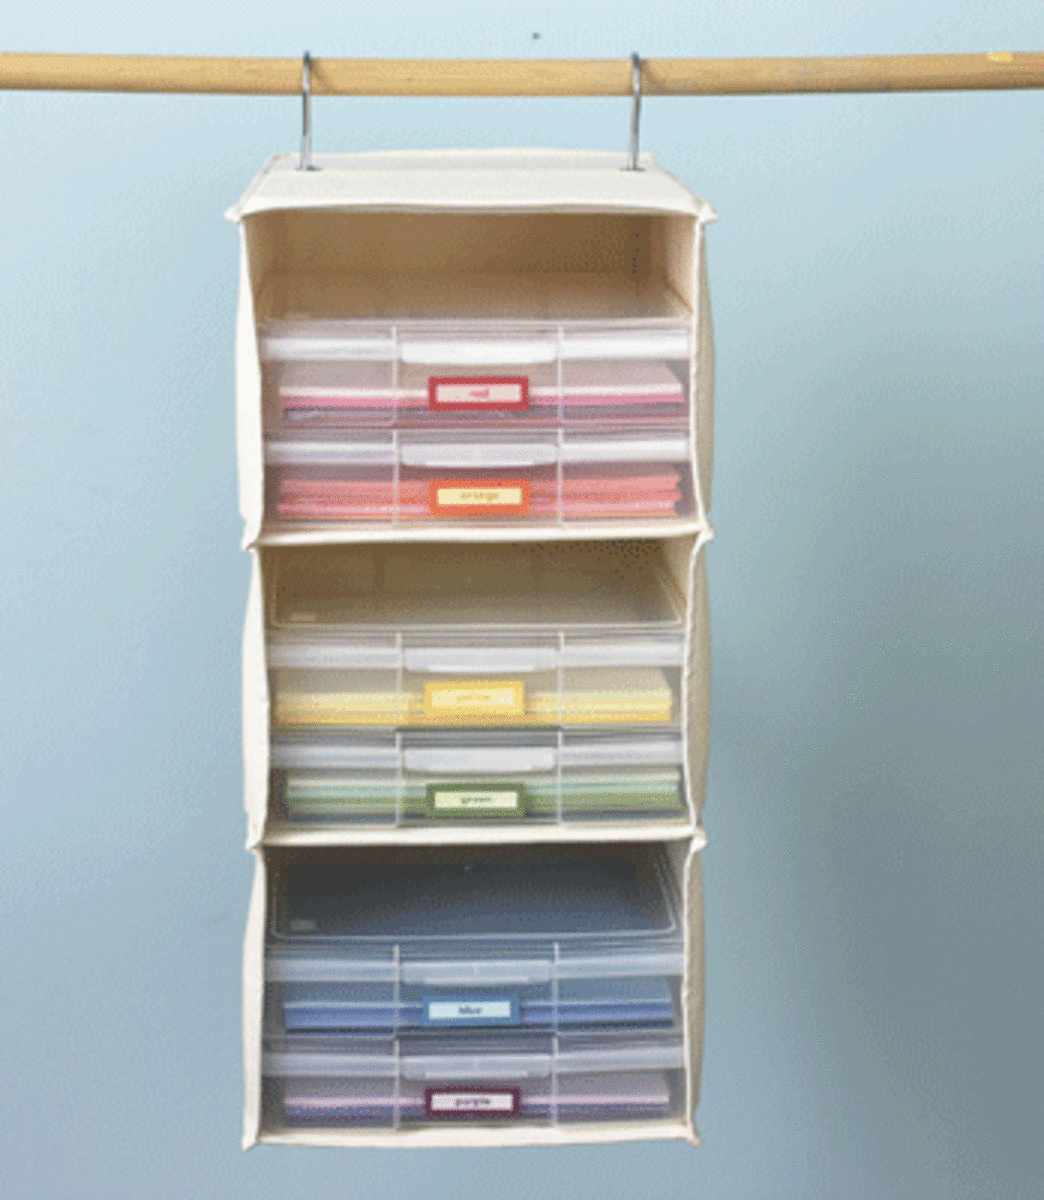 Sweater shelves can be used to store paper in small  areas or closets